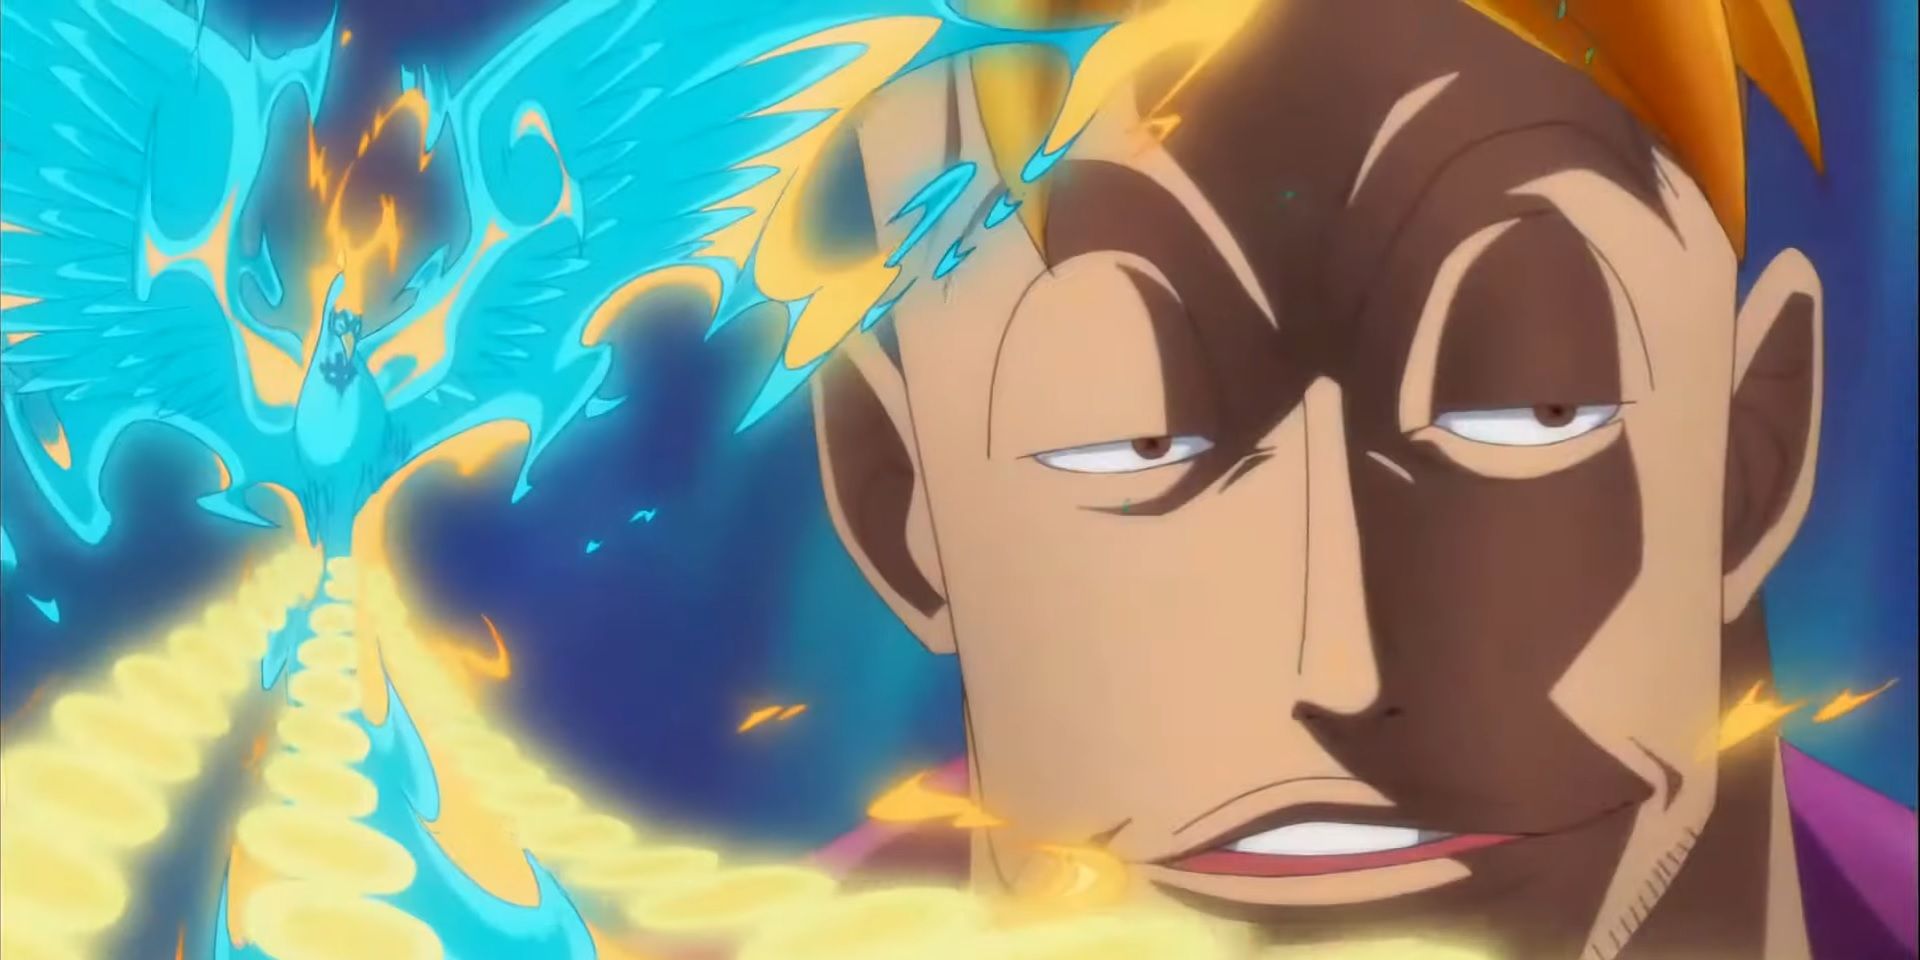 Marco The Phoenix (One Piece) takes on Pain (Naruto)!